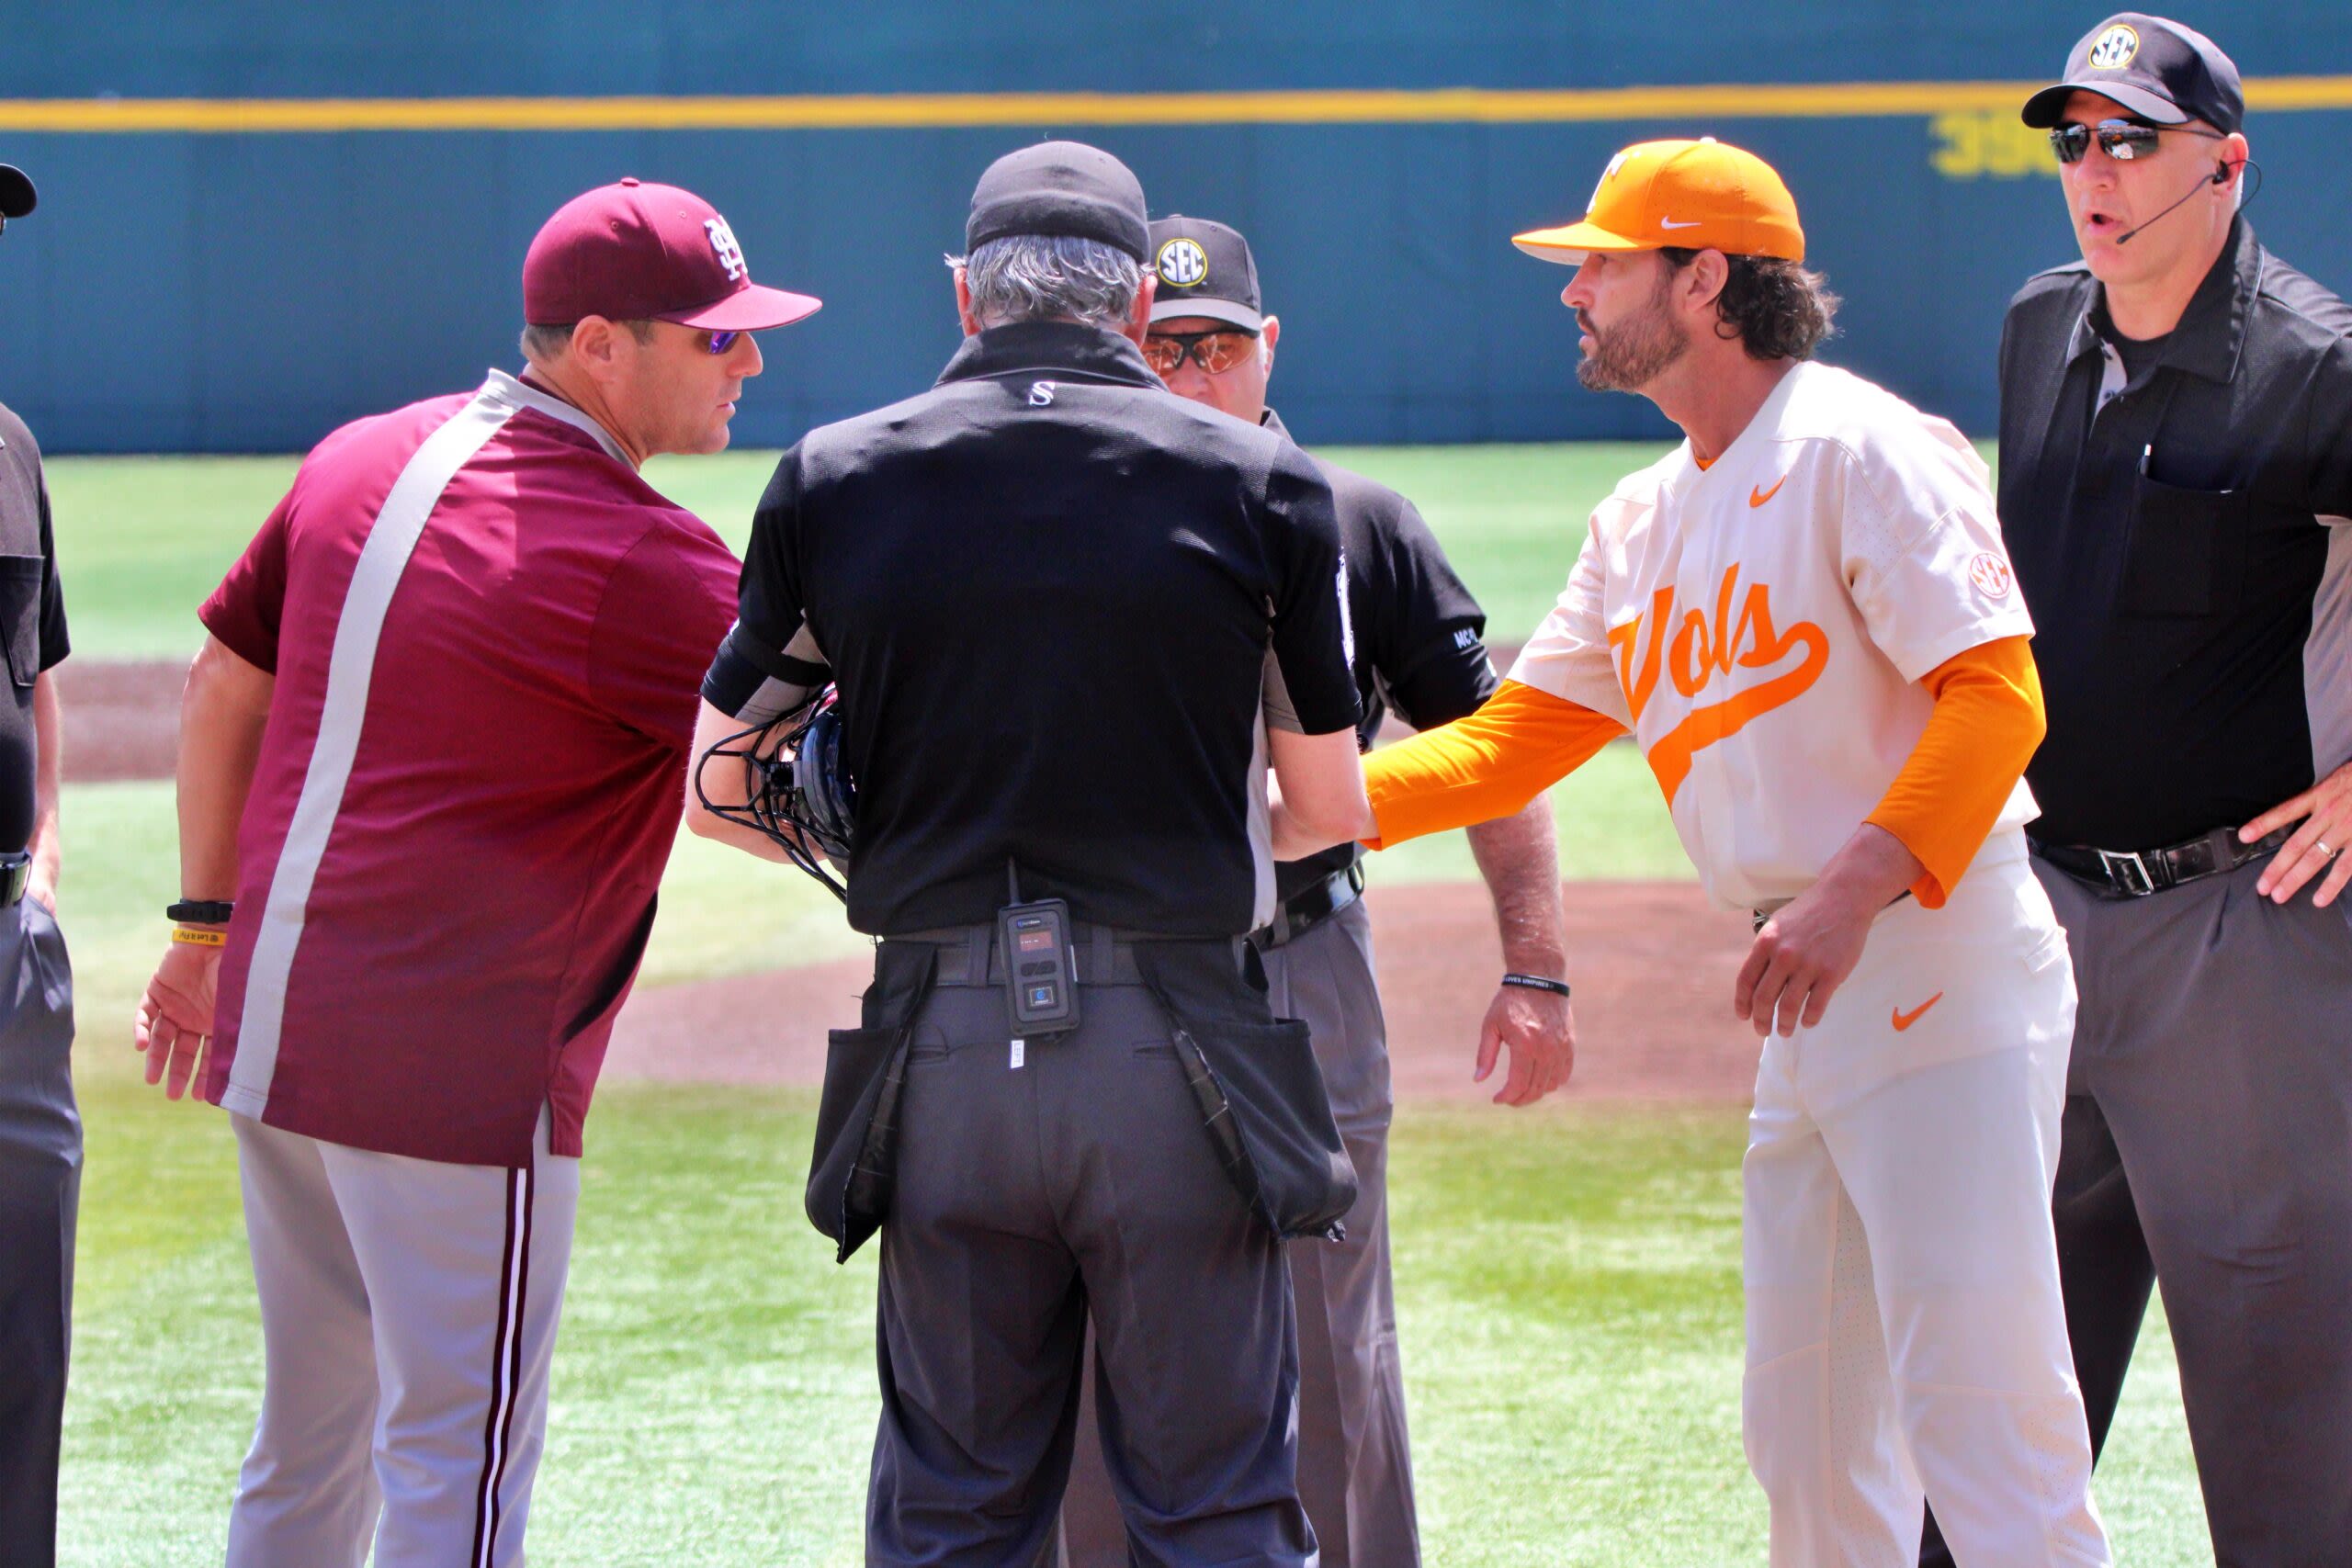 How to watch Tennessee-Mississippi State baseball game